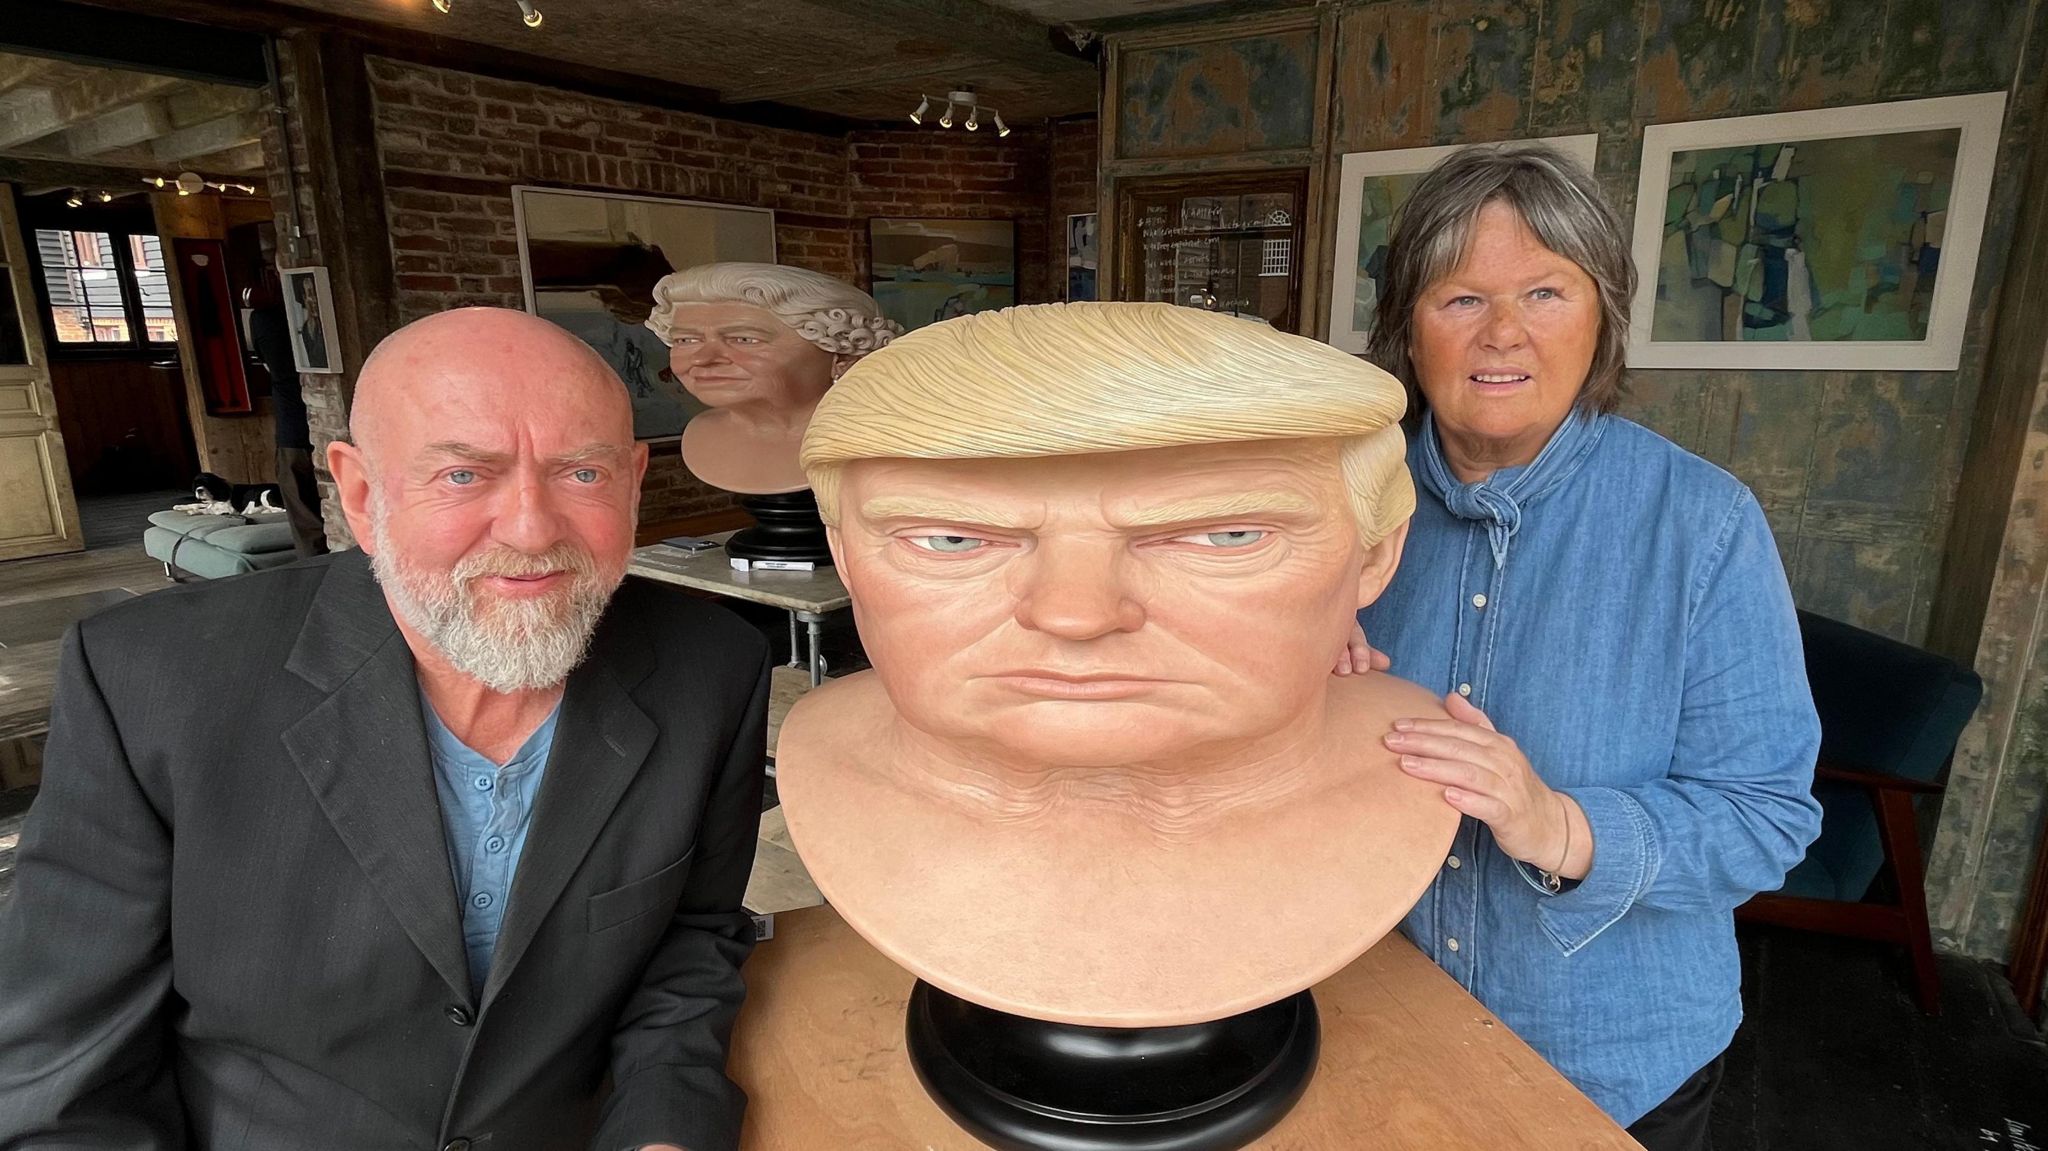 Artist John Humphreys and gallery owner Wendy Bowker stand on each side of the sculpture